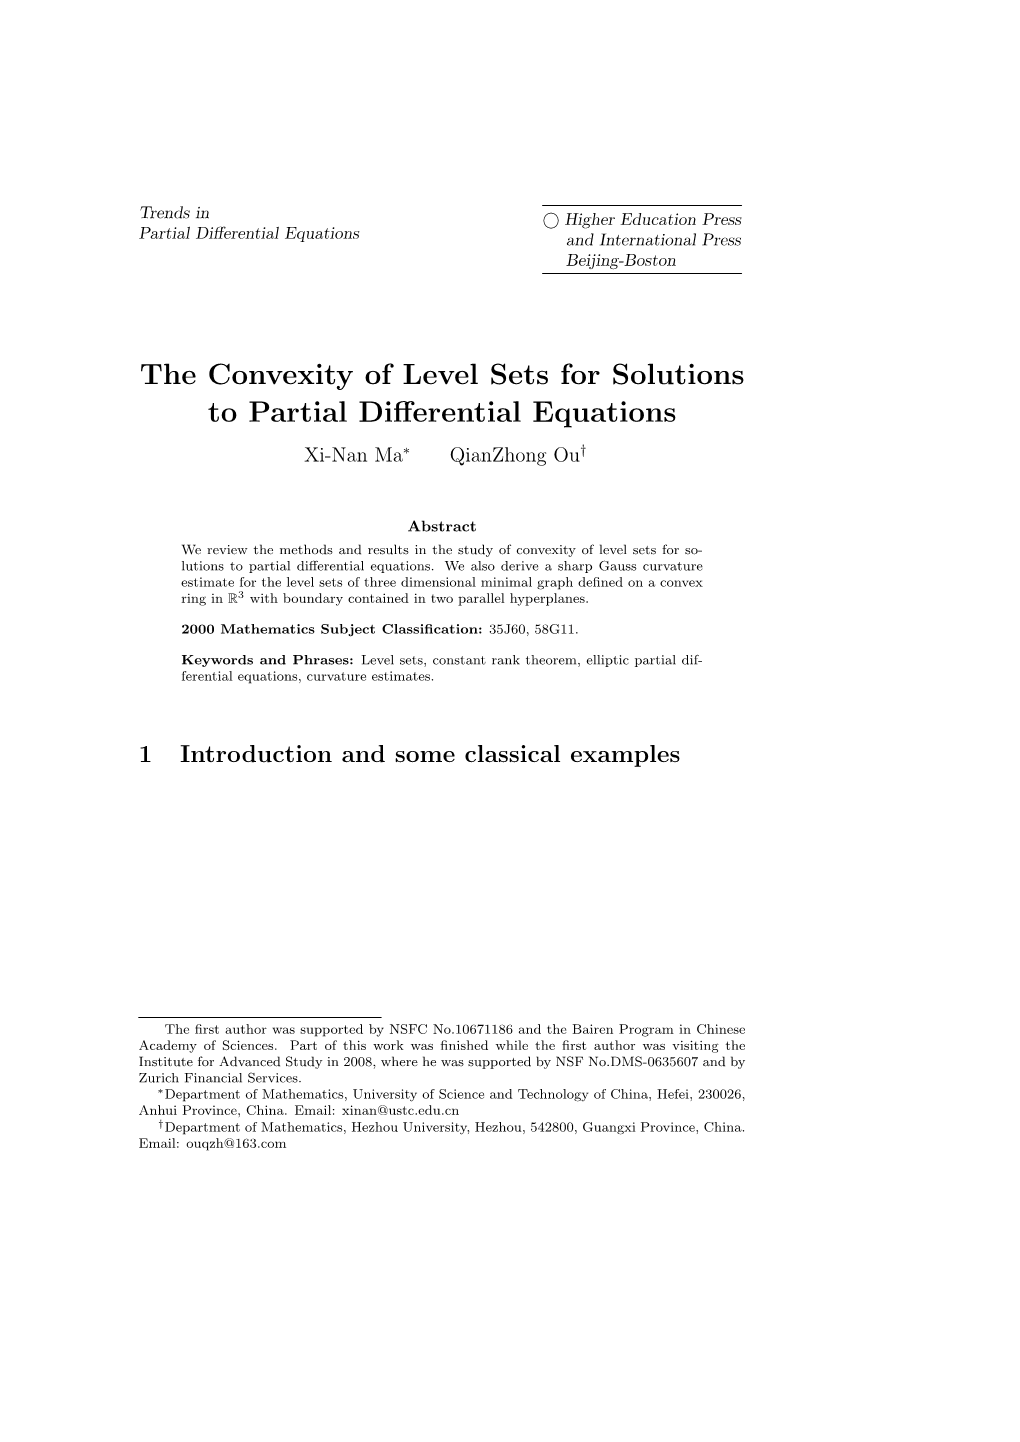 The Convexity of Level Sets for Solutions to Partial Differential